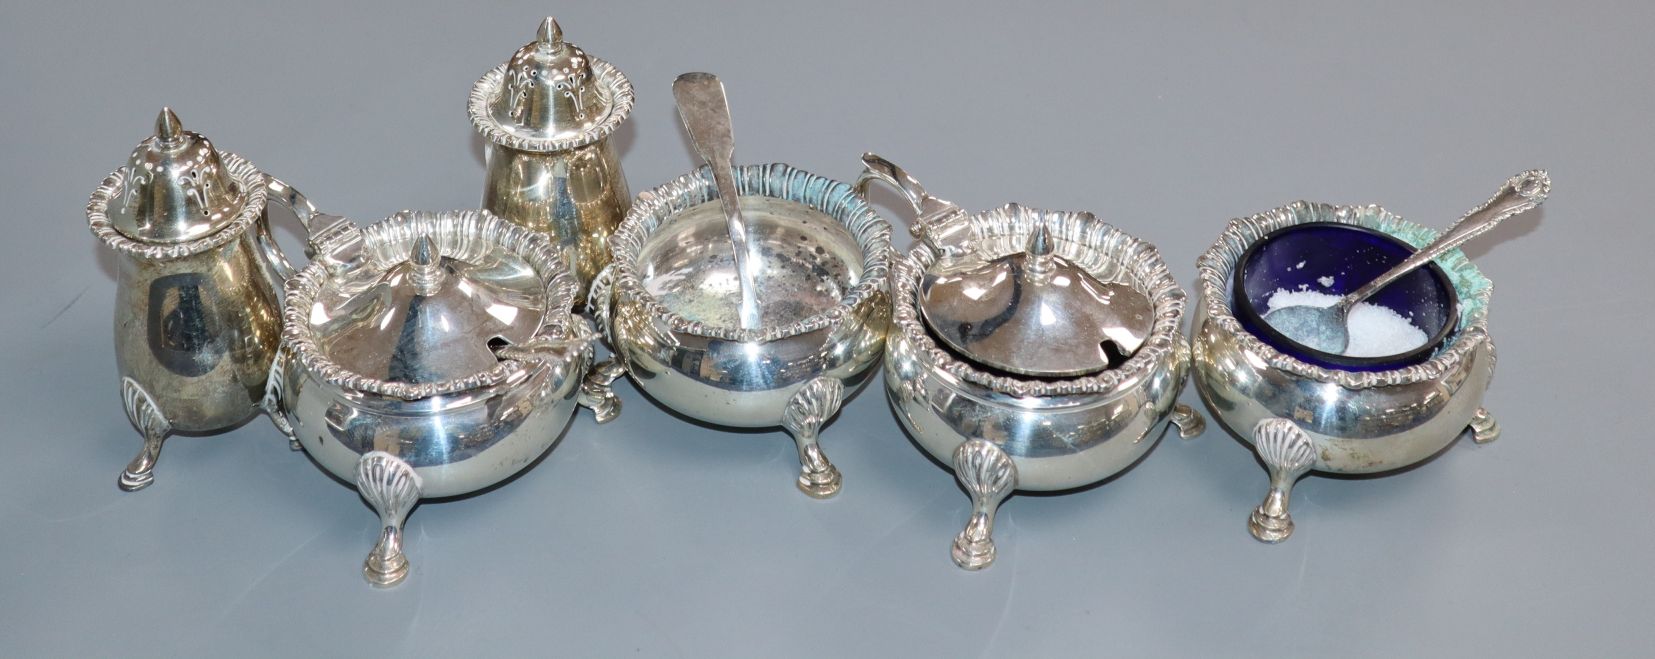 A George VI silver six piece condiment set by Mappin & Webb, with three silver condiment spoons.